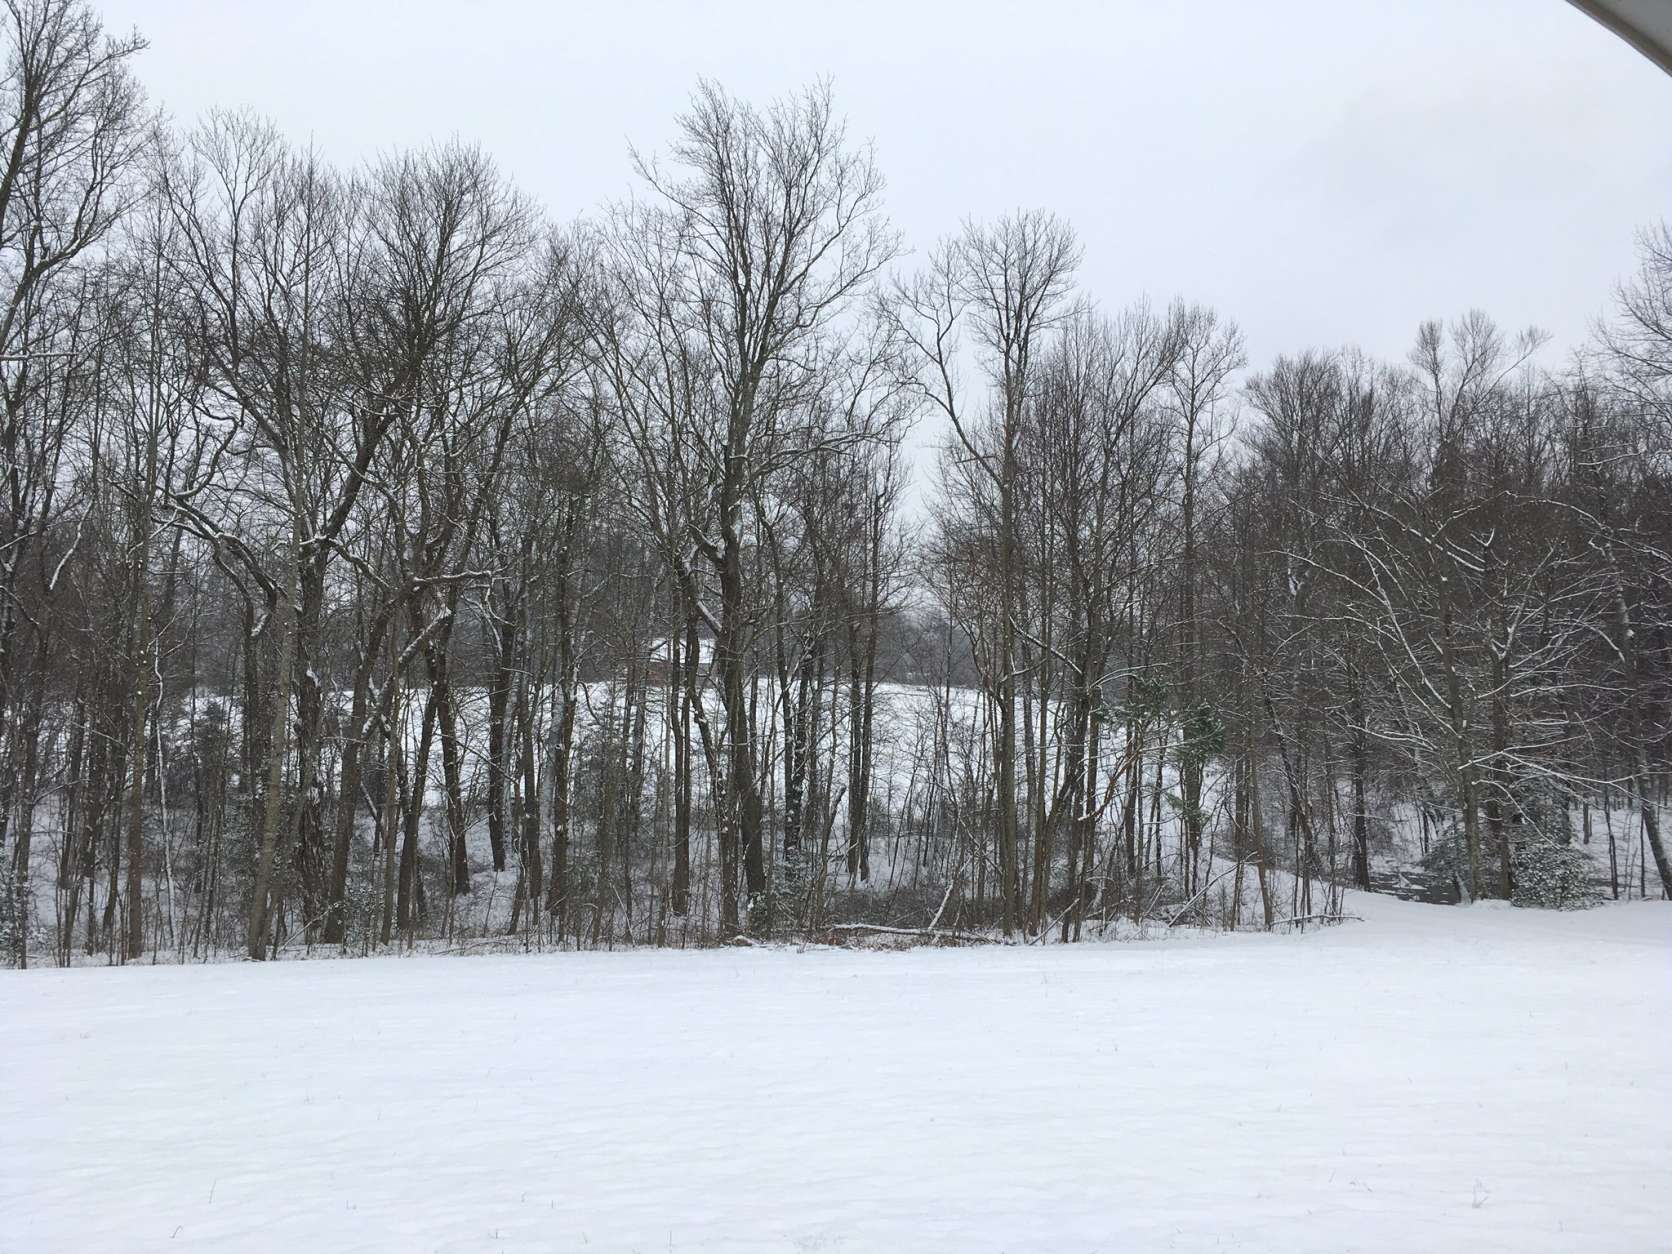 Four and a half inches of snow coated the ground by 11:30 a.m. in Calvert County, Md. (Courtesy Jim White)